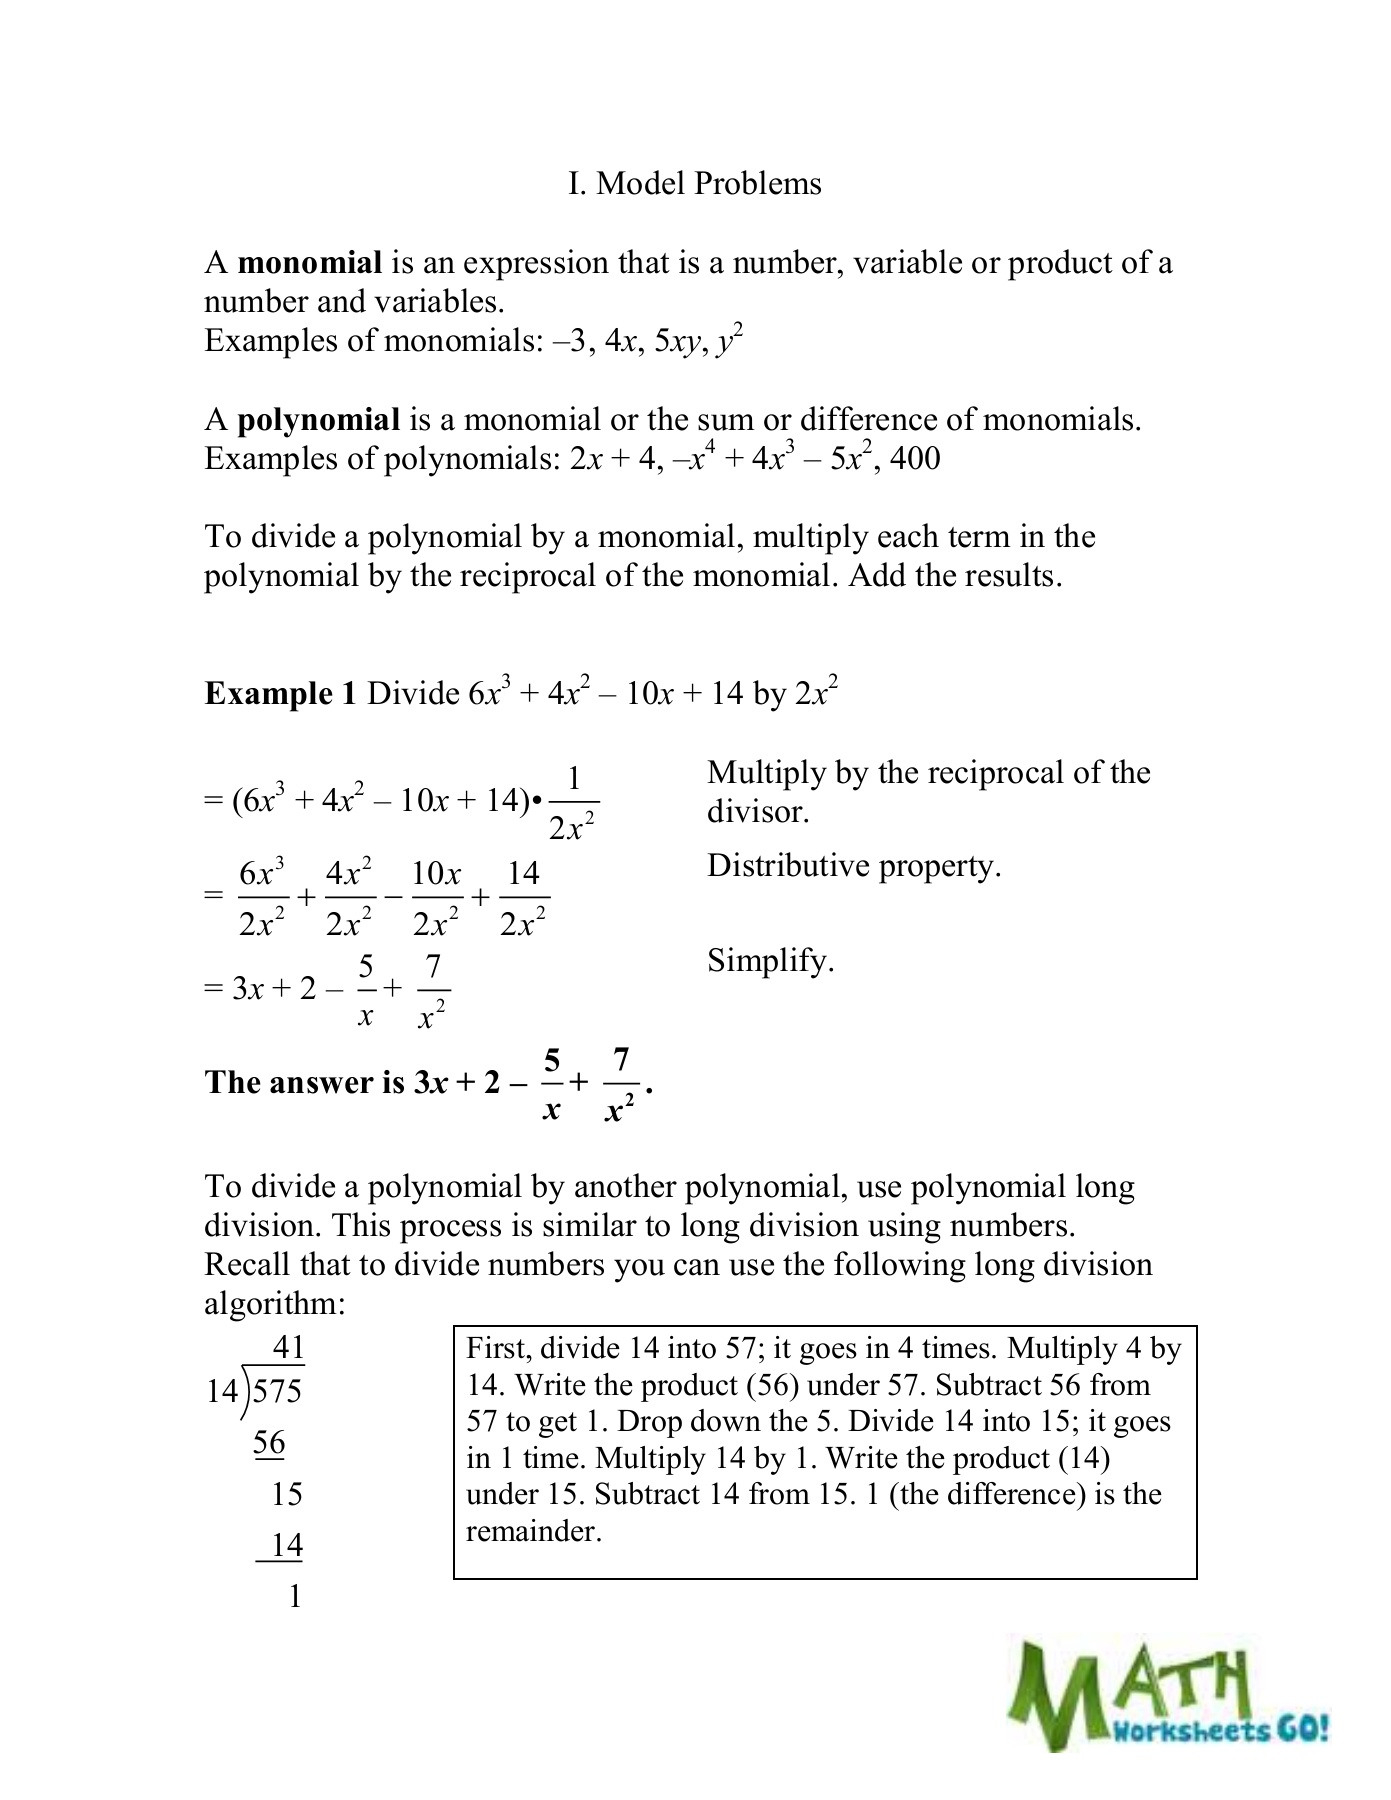 Dividingpolynomialsworksheet Pages 1  6  Text Version  Anyflip